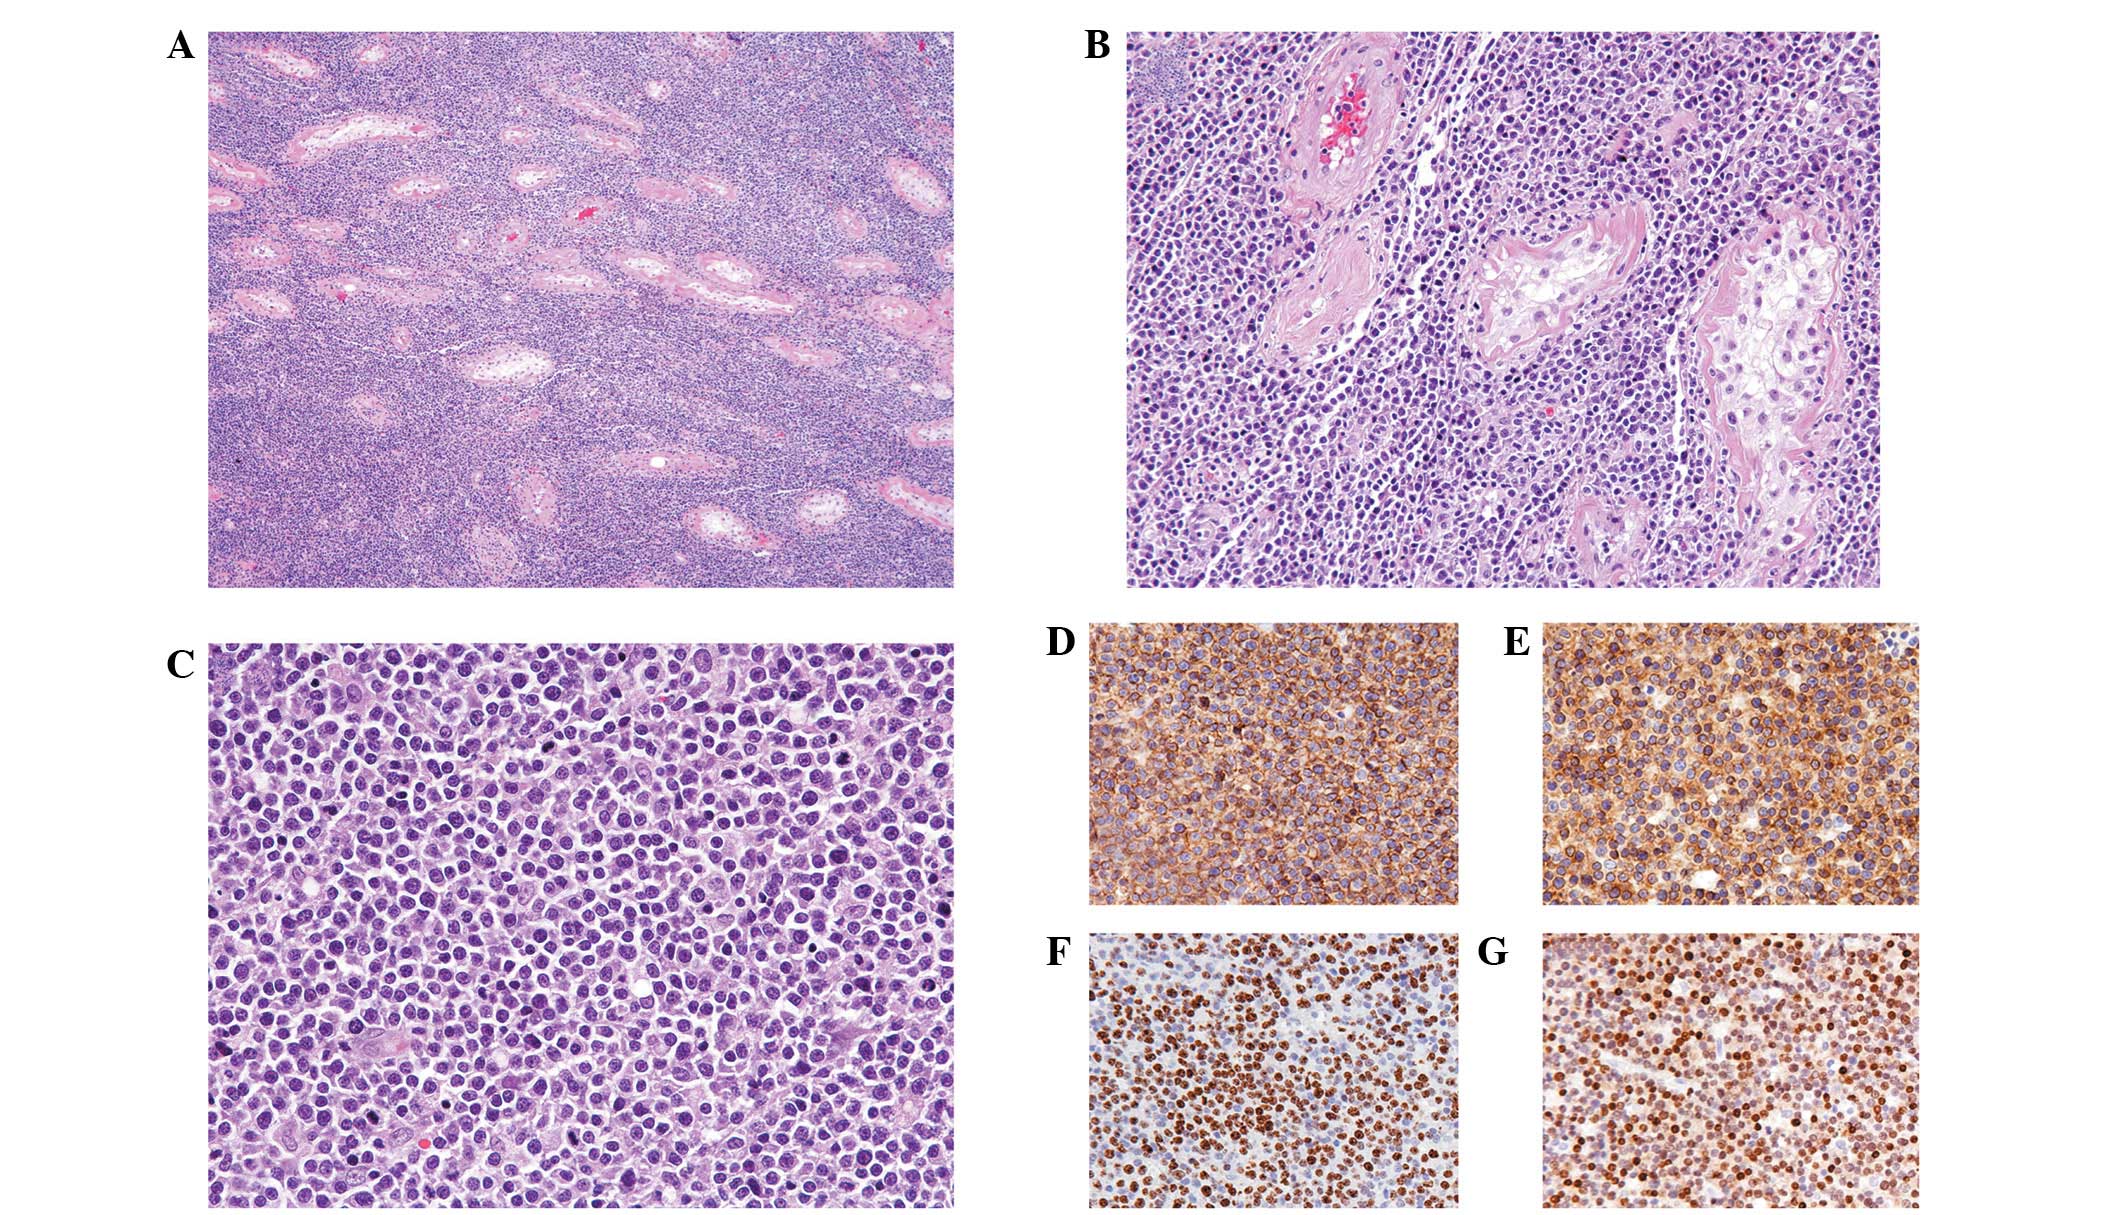 Primary Testicular Diffuse Large B Cell Lymphoma A Case Report